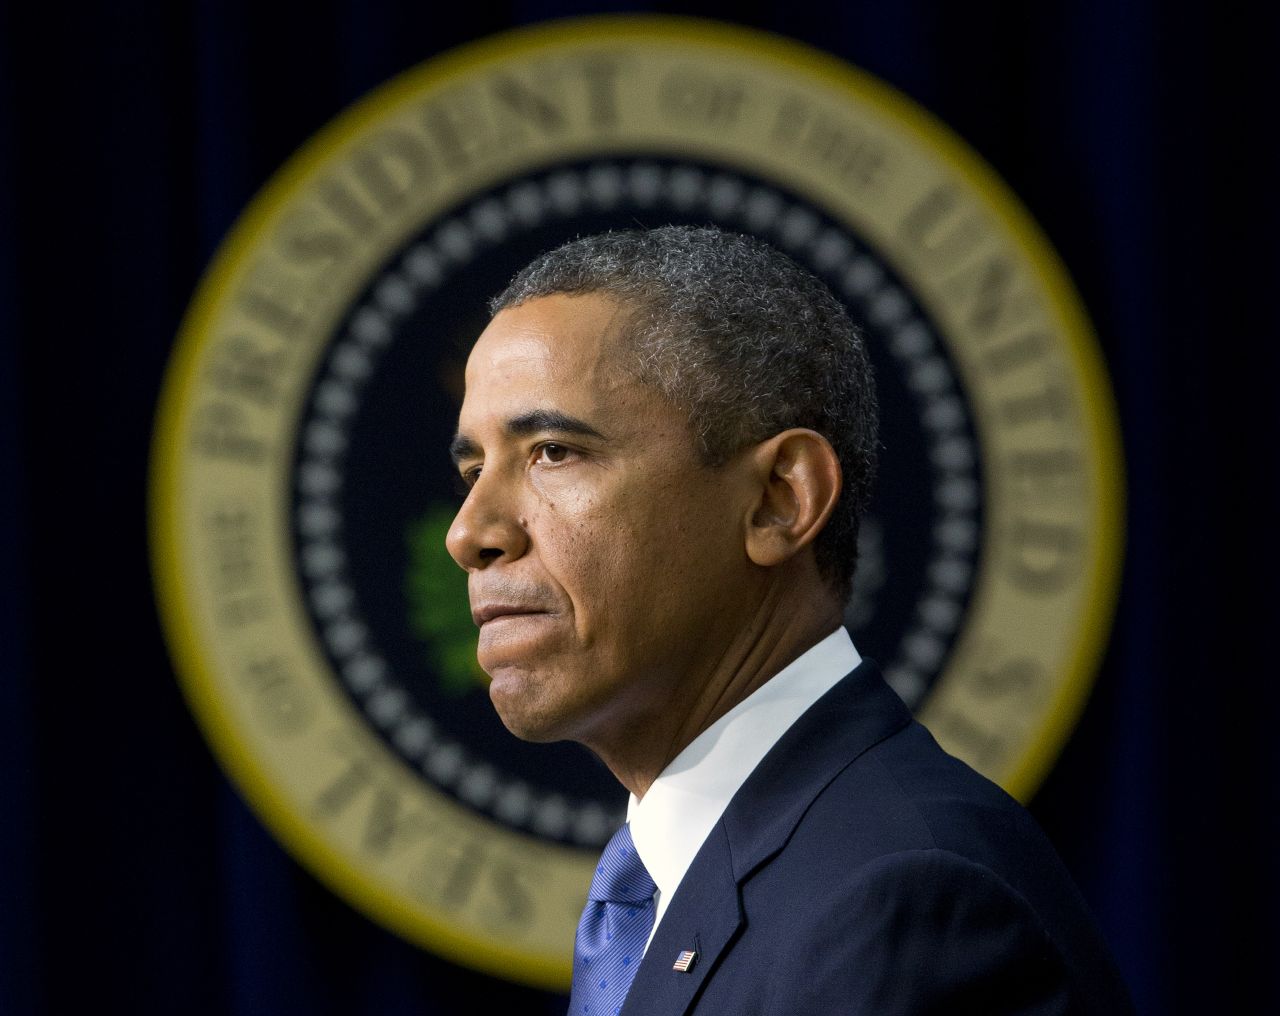 Obama pauses as he speaks in September 2013 about the shooting at the Washington Navy Yard, mourning what he called "yet another mass shooting" that took the life of American patriots. 